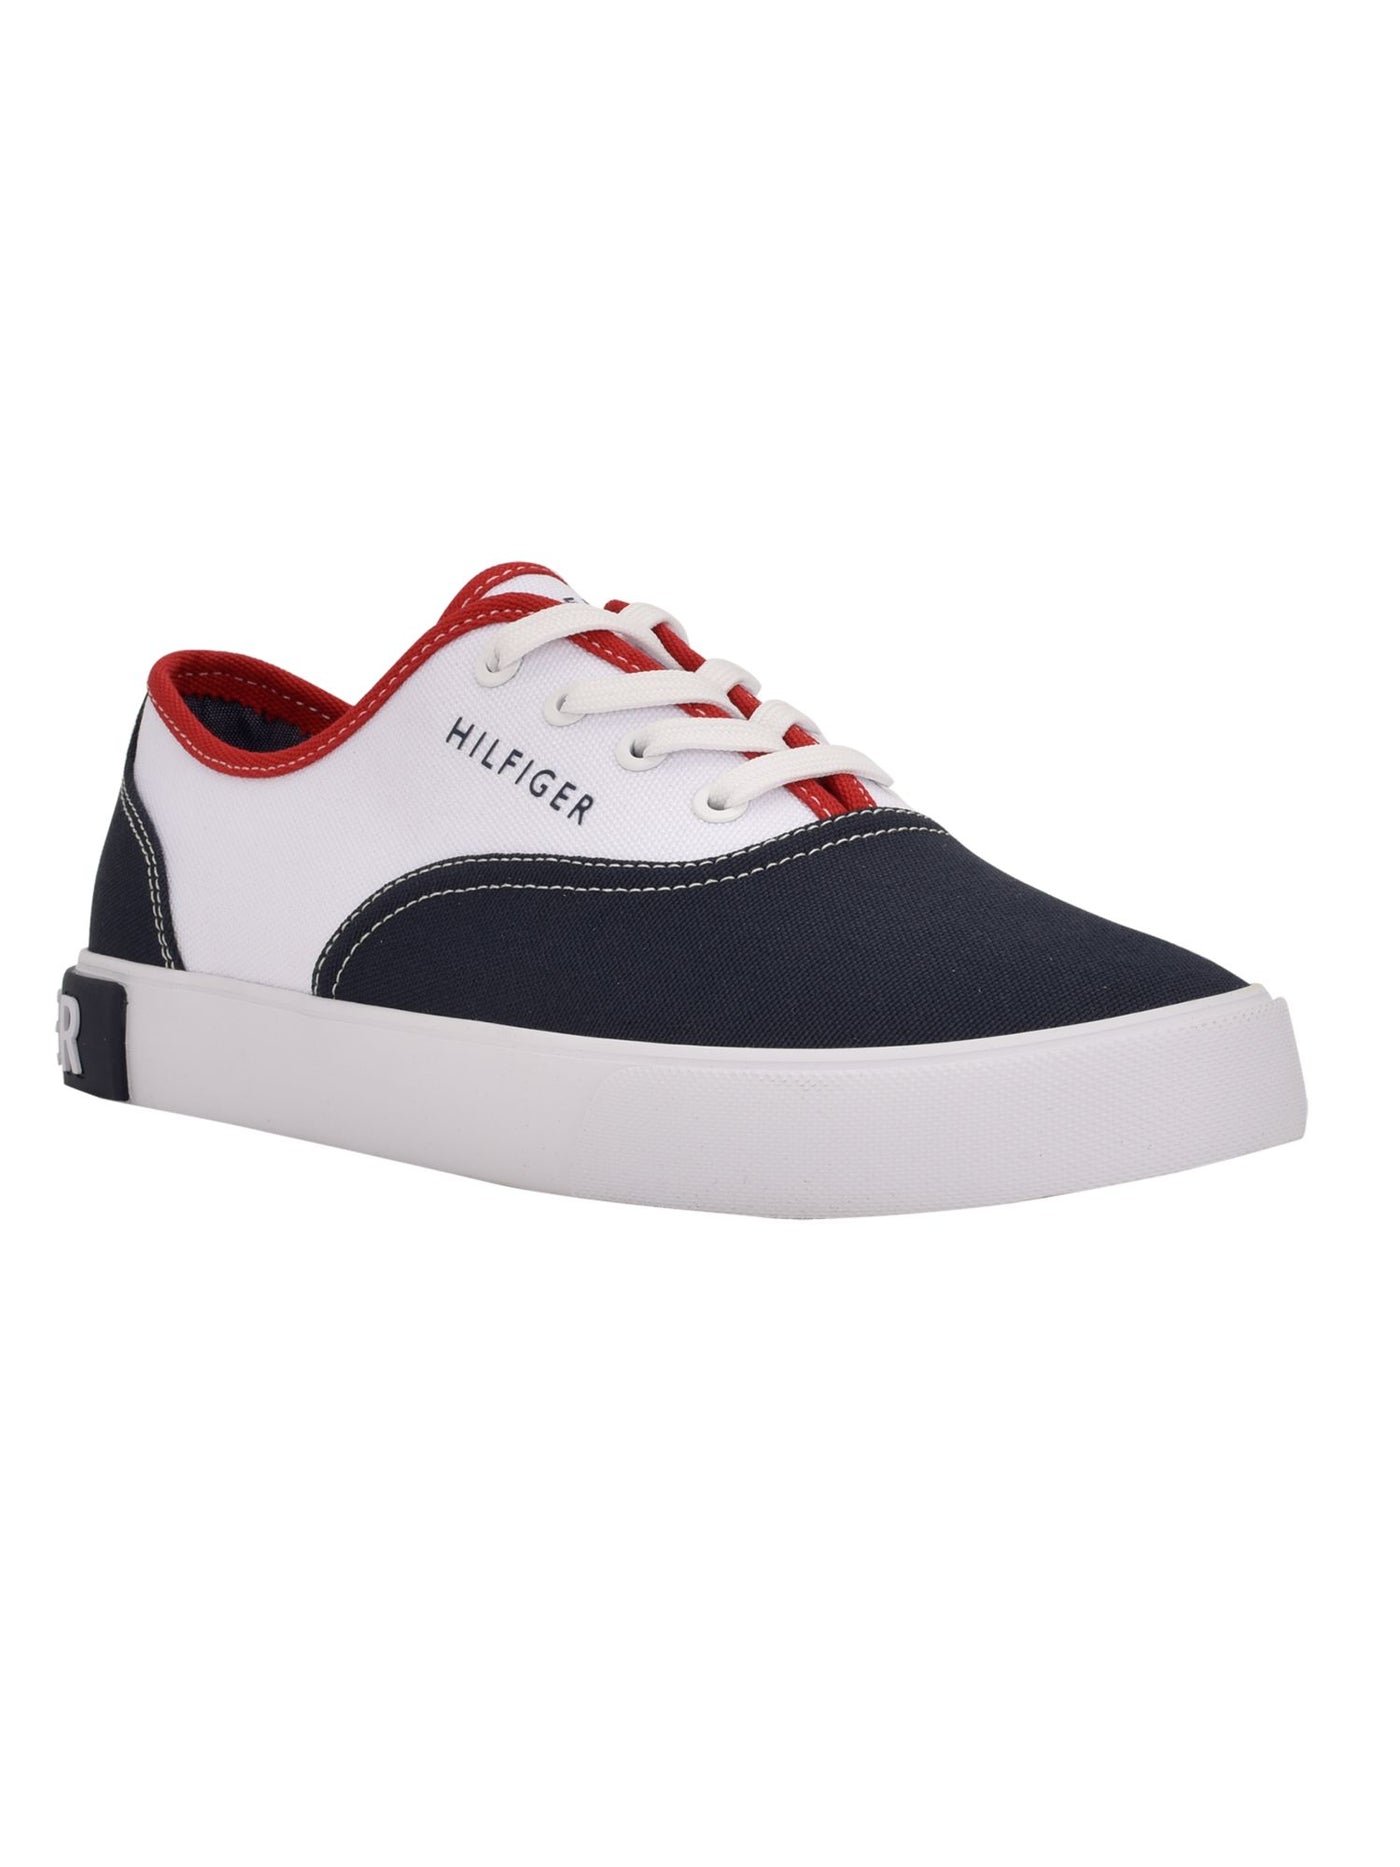 TOMMY HILFIGER Mens Navy Color Block Cushioned Comfort Ralem Round Toe Platform Lace-Up Sneakers Shoes 10.5 M